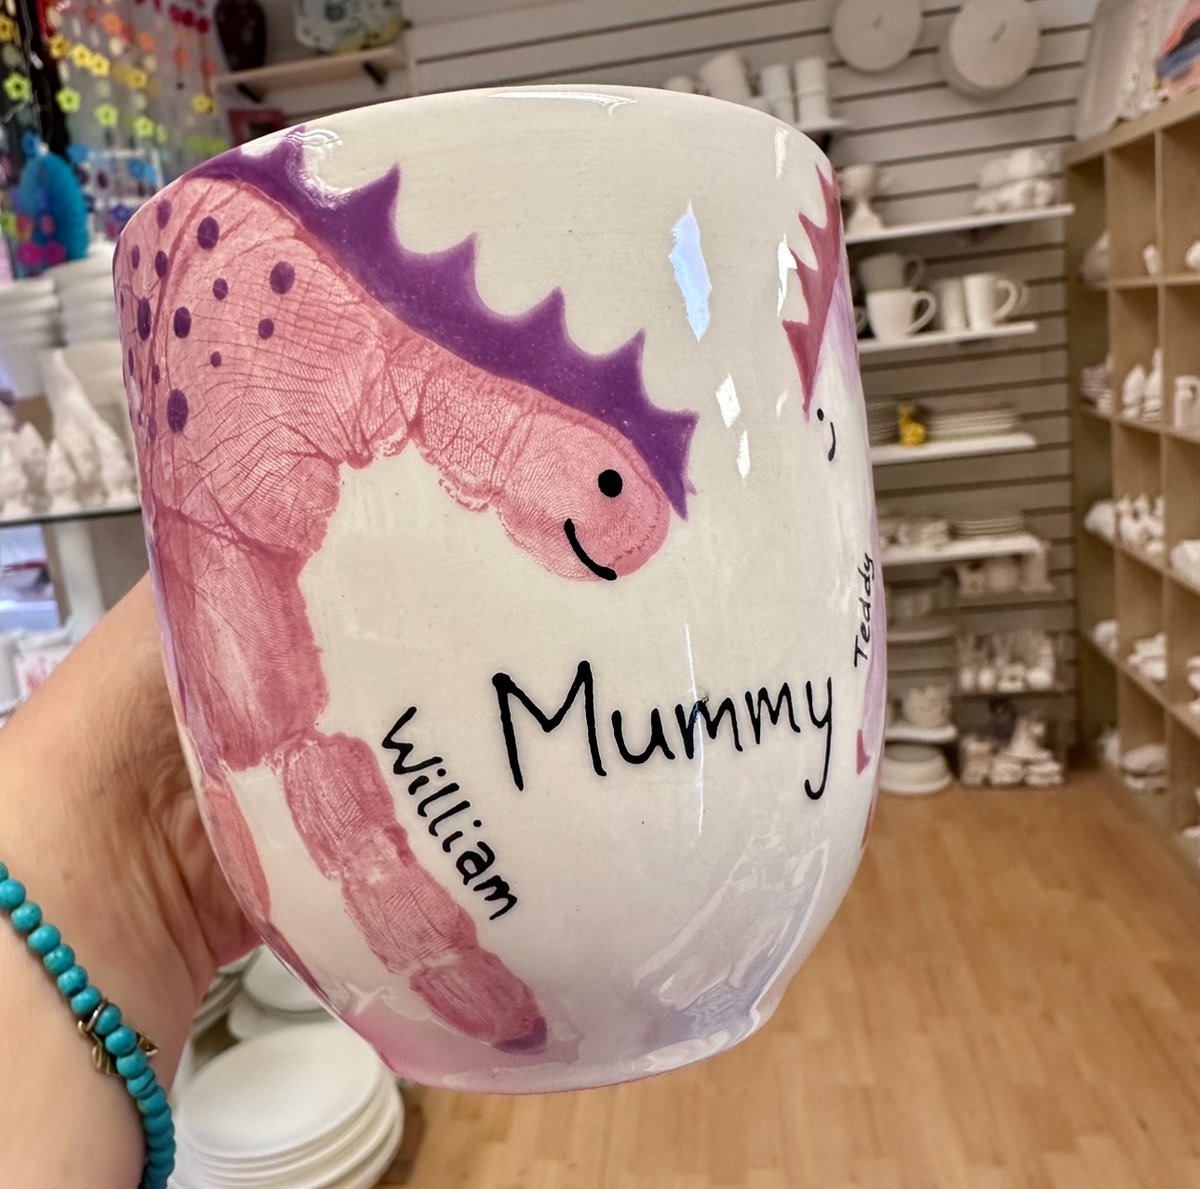 Is your Mum, Nanna, Like a Mum etc absolutely ROARSOME? If you think they are why not show them how much you love them this Mothers Day and book in to have their handprints turned into a roar-tastic dinosaur
#mothersday #mothersdaygifts #uniquegifts #giftsformum #giftsforgrandma